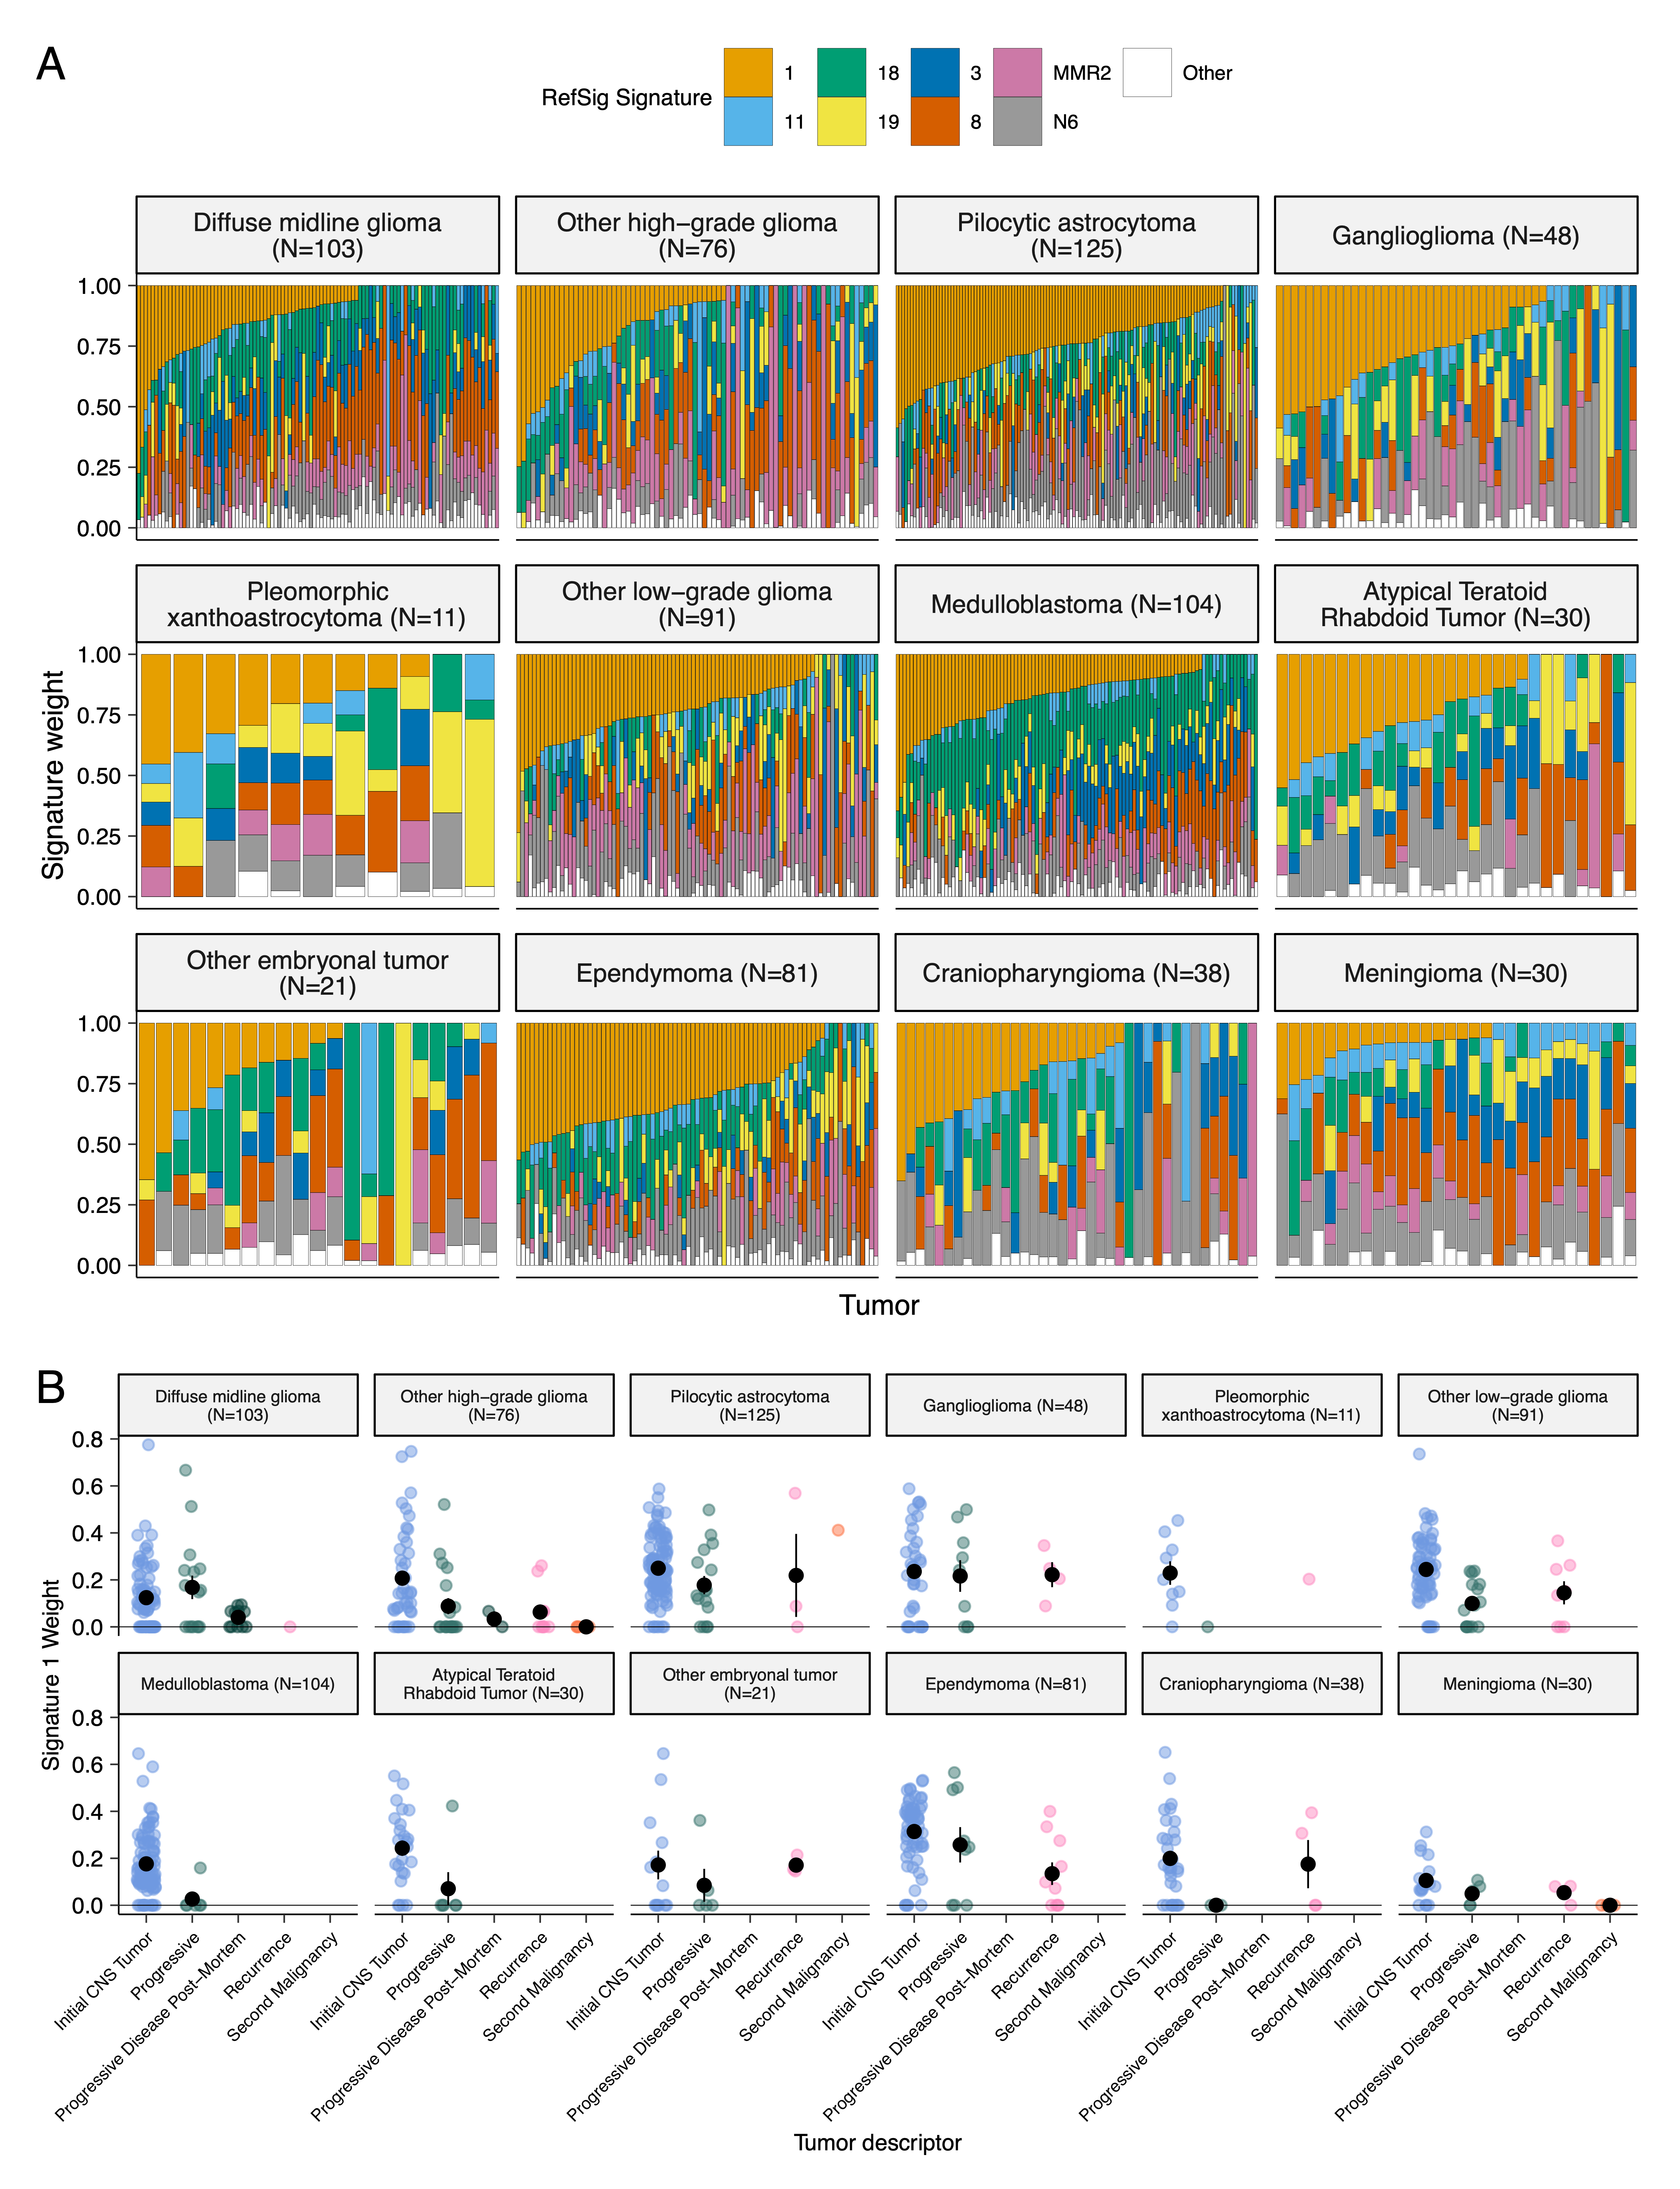 Figure S4: Mutational signatures in pediatric brain tumors, Related to Figure 3. (A) Sample-specific RefSig signature weights across cancer groups ordered by decreasing Signature 1 exposure. (B) Proportion of Signature 1 plotted by phase of therapy for each cancer group.